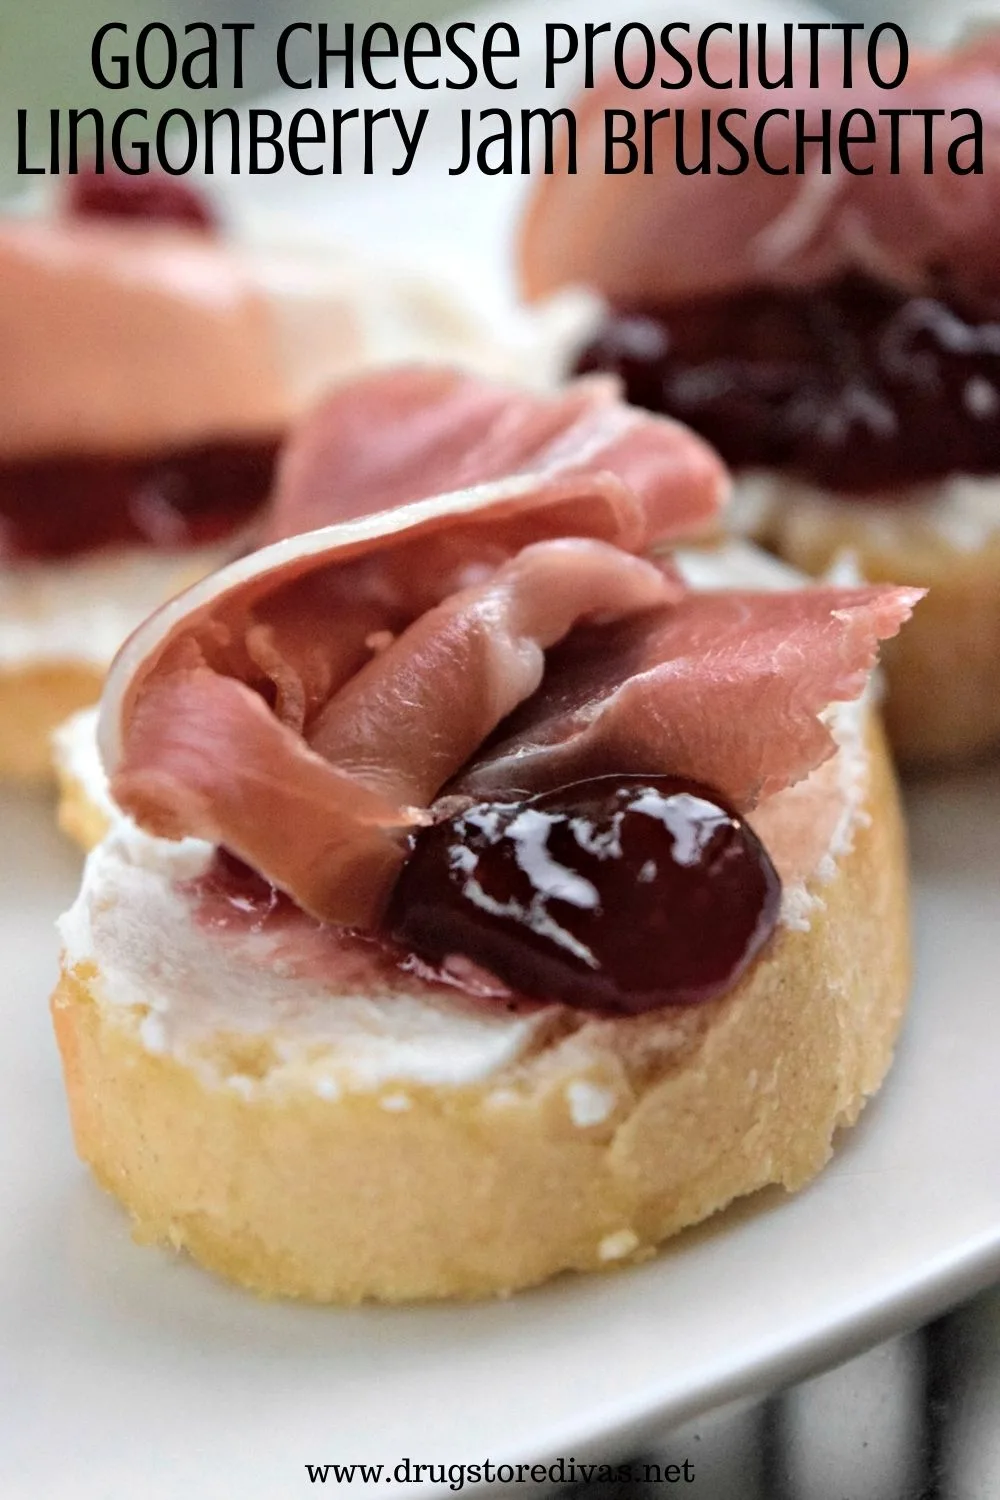 This Goat Cheese Prosciutto Lingonberry Jam Bruschetta is the perfect Thanksgiving appetizer. Get the recipe at www.drugstoredivas.net.